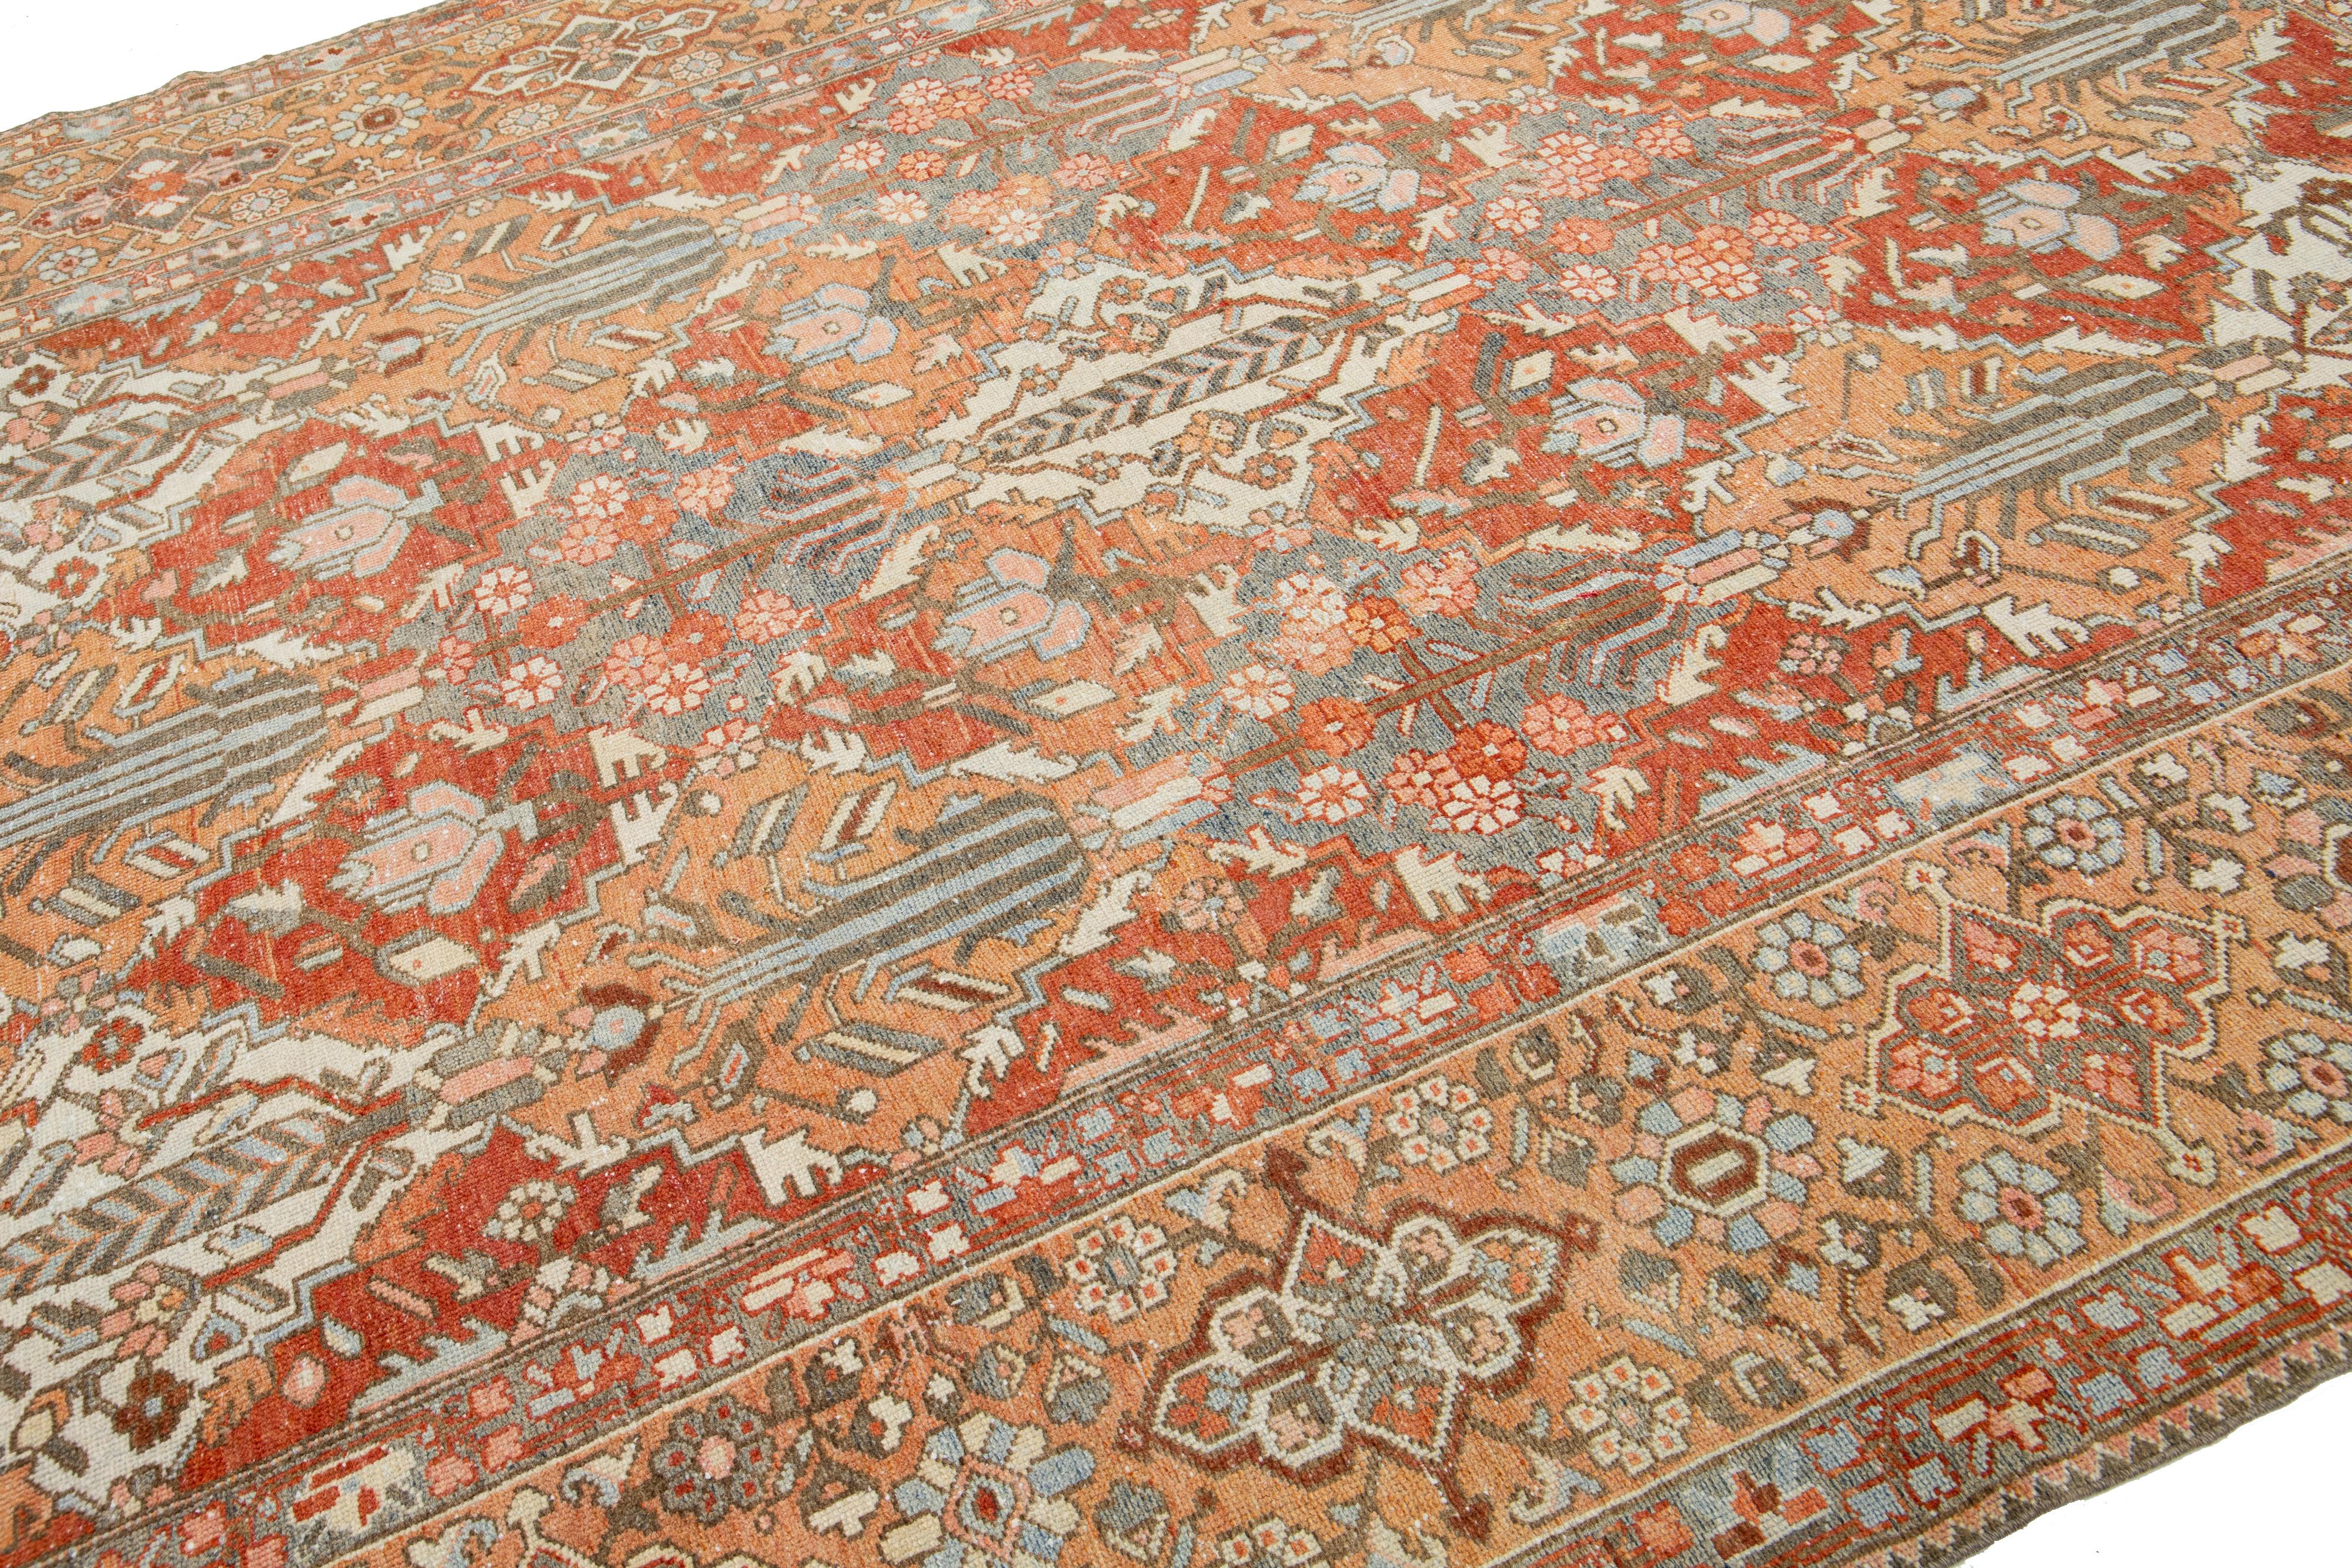 Hand-Knotted Handmade 1920s Persian Bakhtiari Wool Rug with Floral Motif In Orange  For Sale